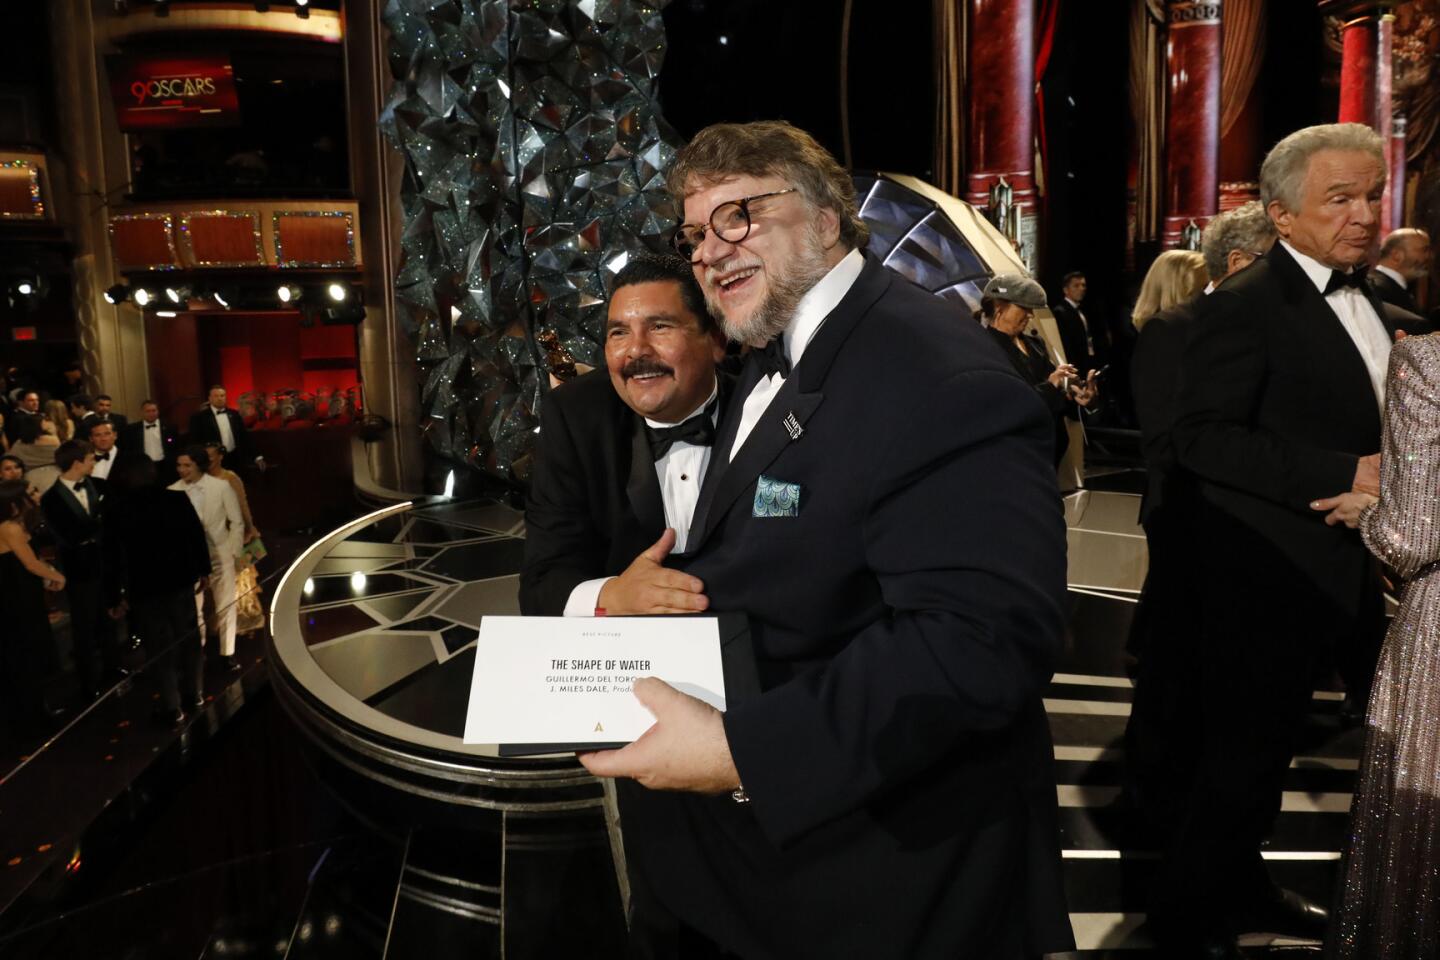 Oscar winner Guillermo Del Toro poses with Jimmy Kimmel pal Guillermo Rodriguez at the 90th Academy Awards.